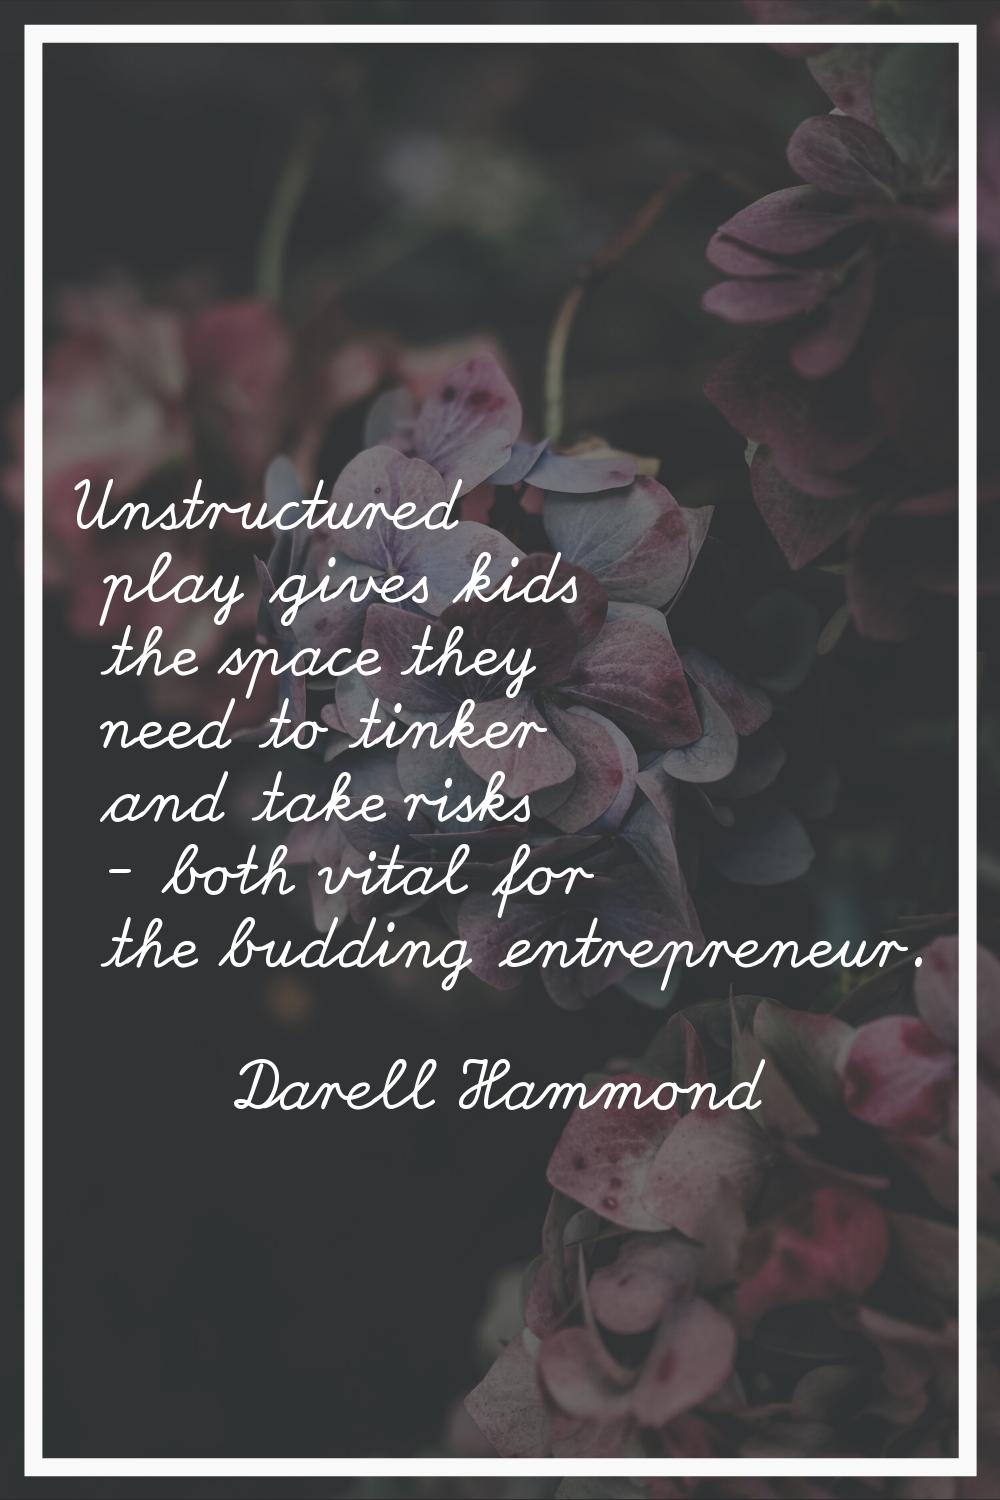 Unstructured play gives kids the space they need to tinker and take risks - both vital for the budd